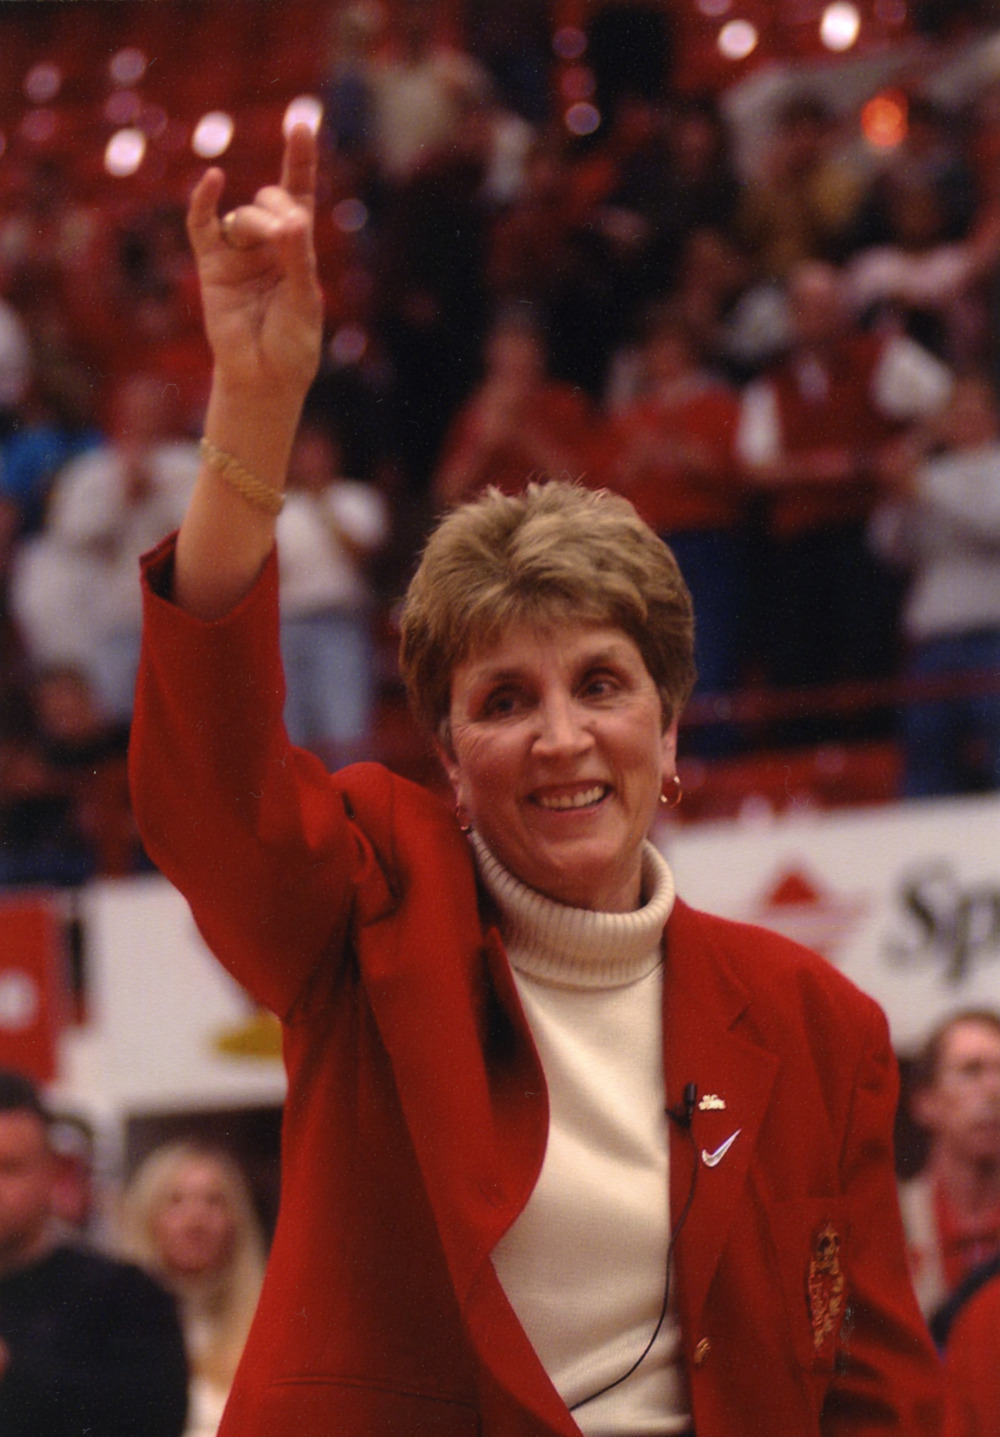 Color photo of women's basketball coach Kay Yow making the wolf symbol at a women's basketball game.